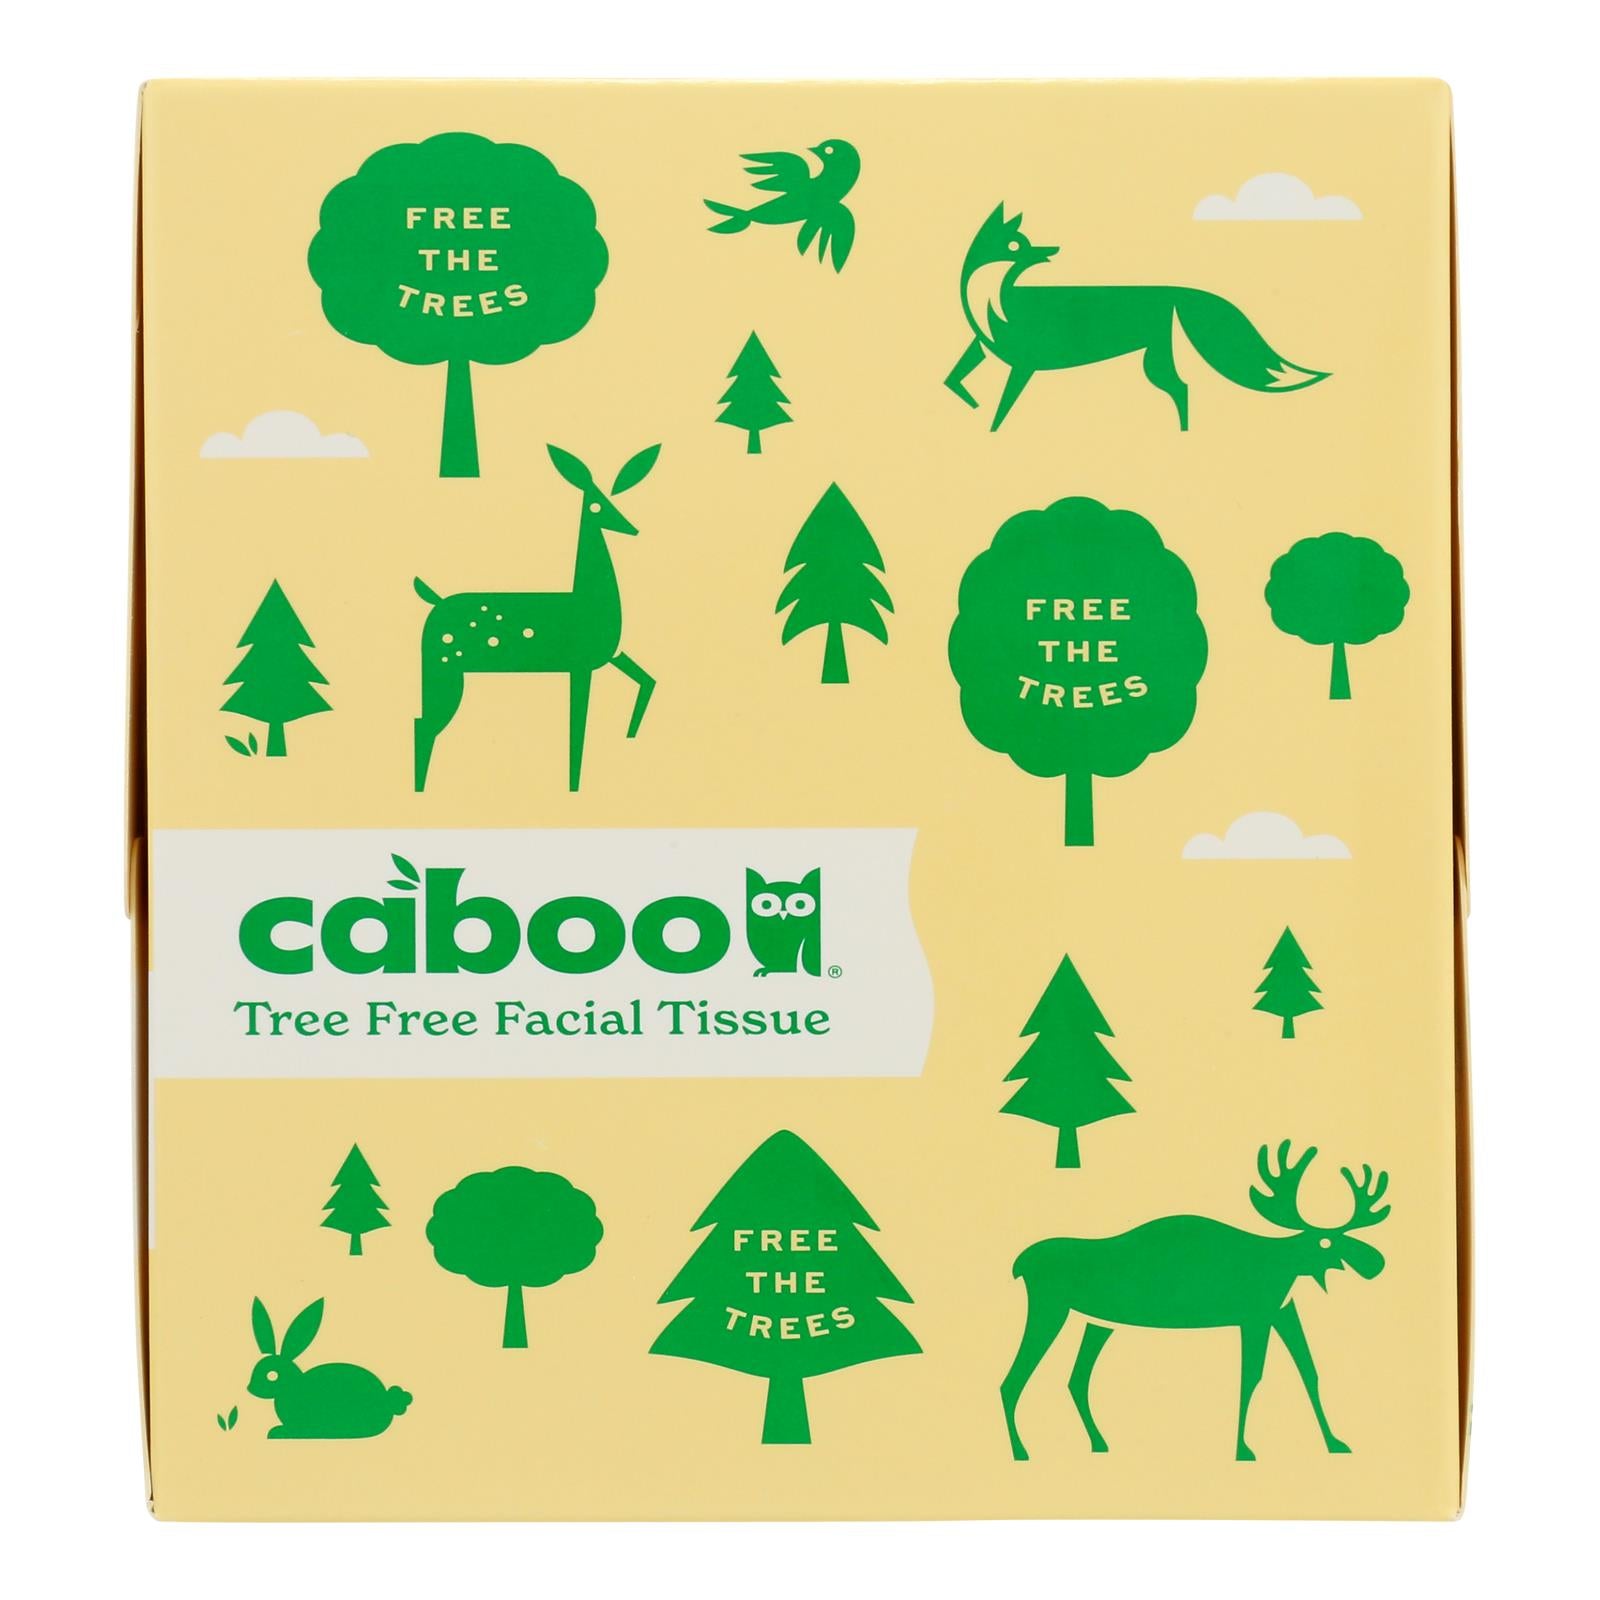 Caboo - Facial Tis Cube 60ct 3ply - Case of 12-1 Count